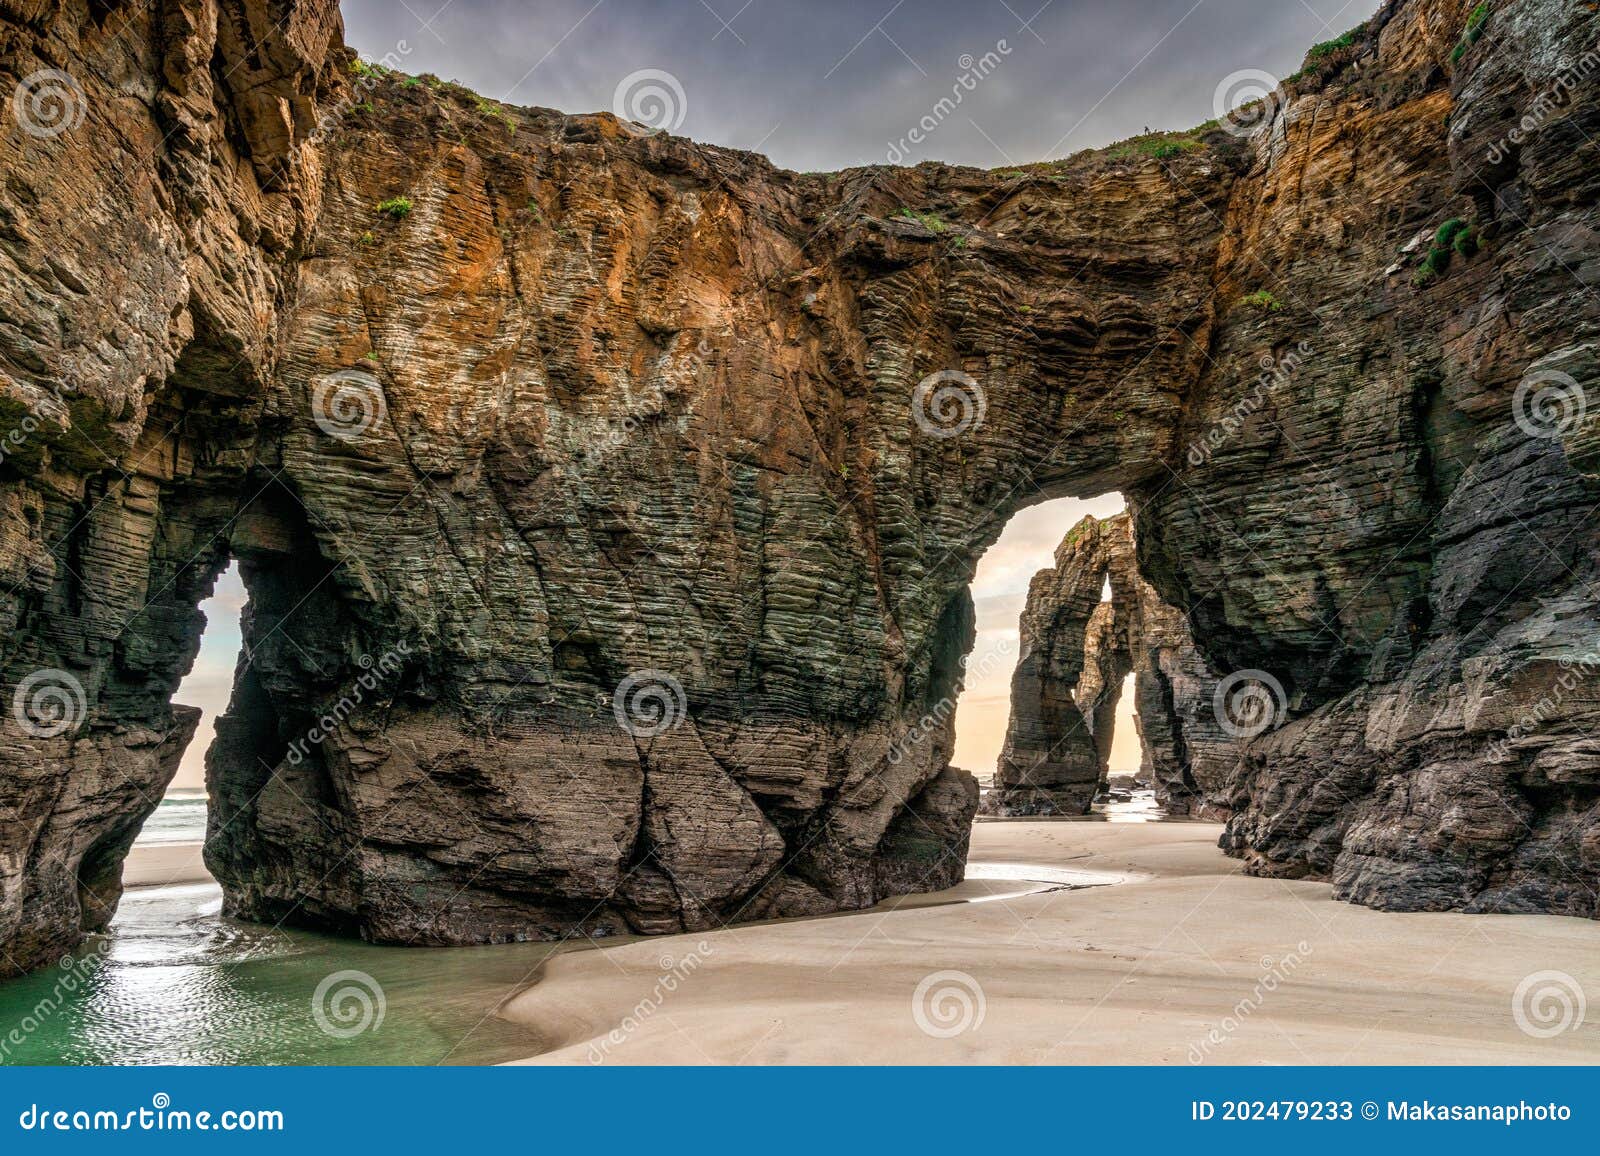 sunrise at the playa de las catedrales beach in galicia in northern spain